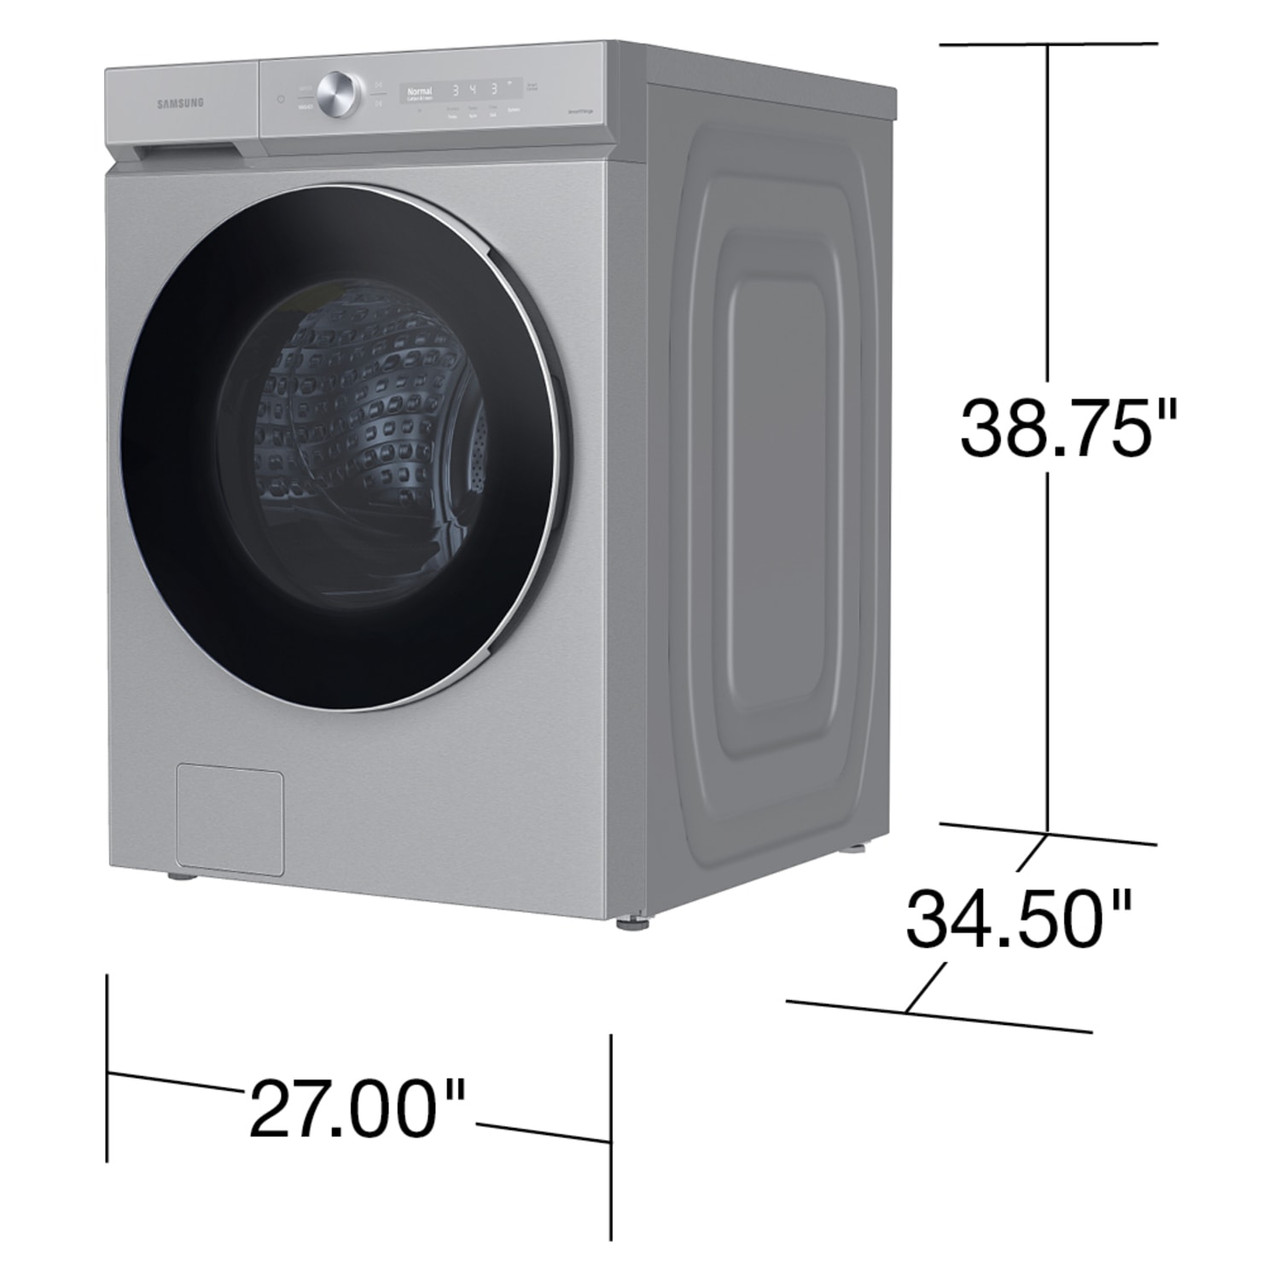 Samsung BESPOKE 5.3 cu. ft. Ultra Capacity Front Load Washer with AI OptiWash and Auto Dispense in Silver Steel